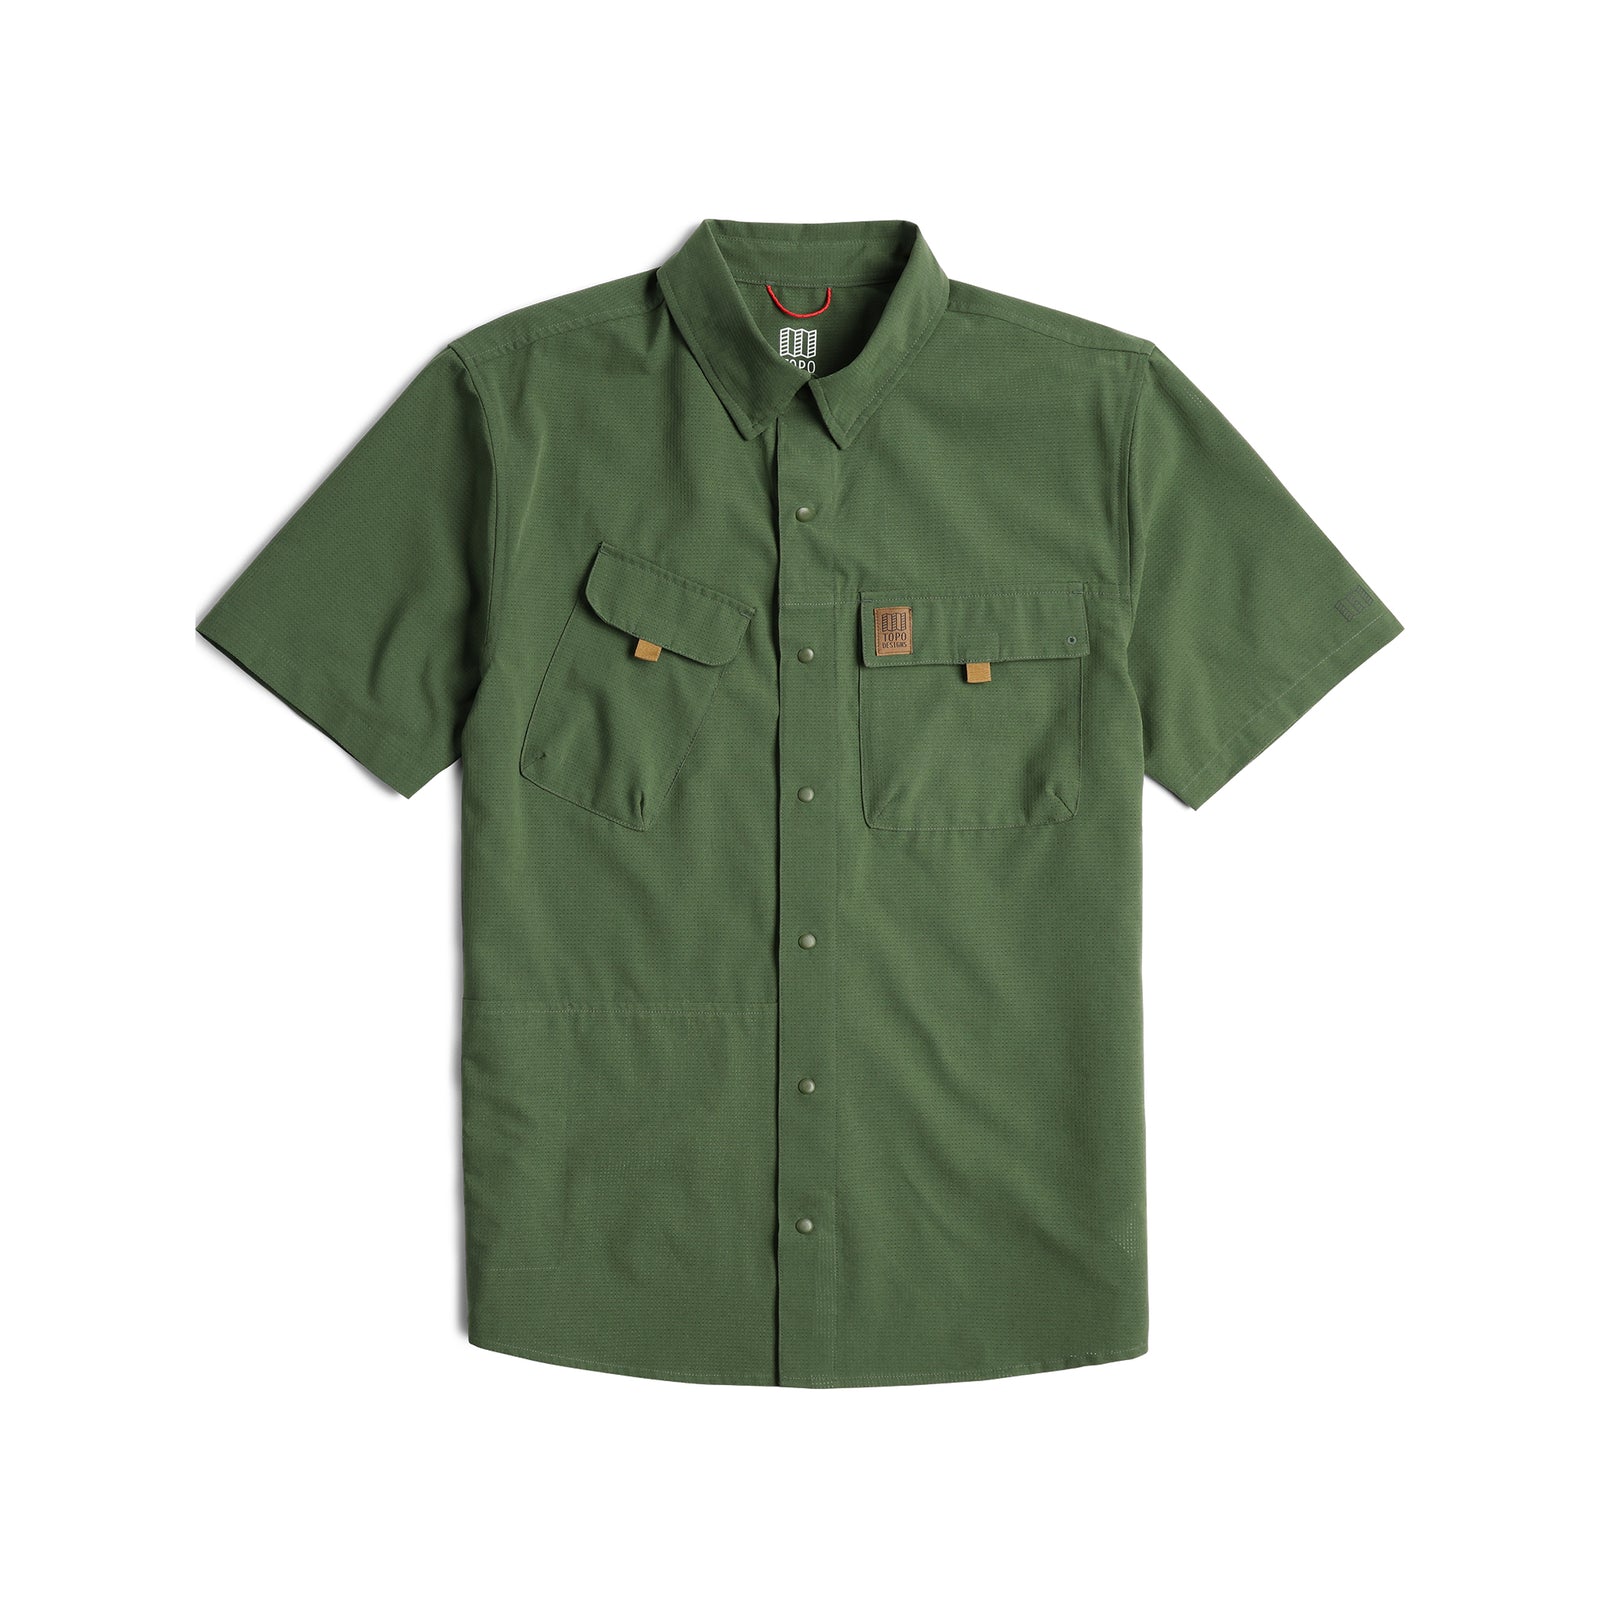 Front View of Topo Designs Retro River Shirt Ss - Men's in "Olive"